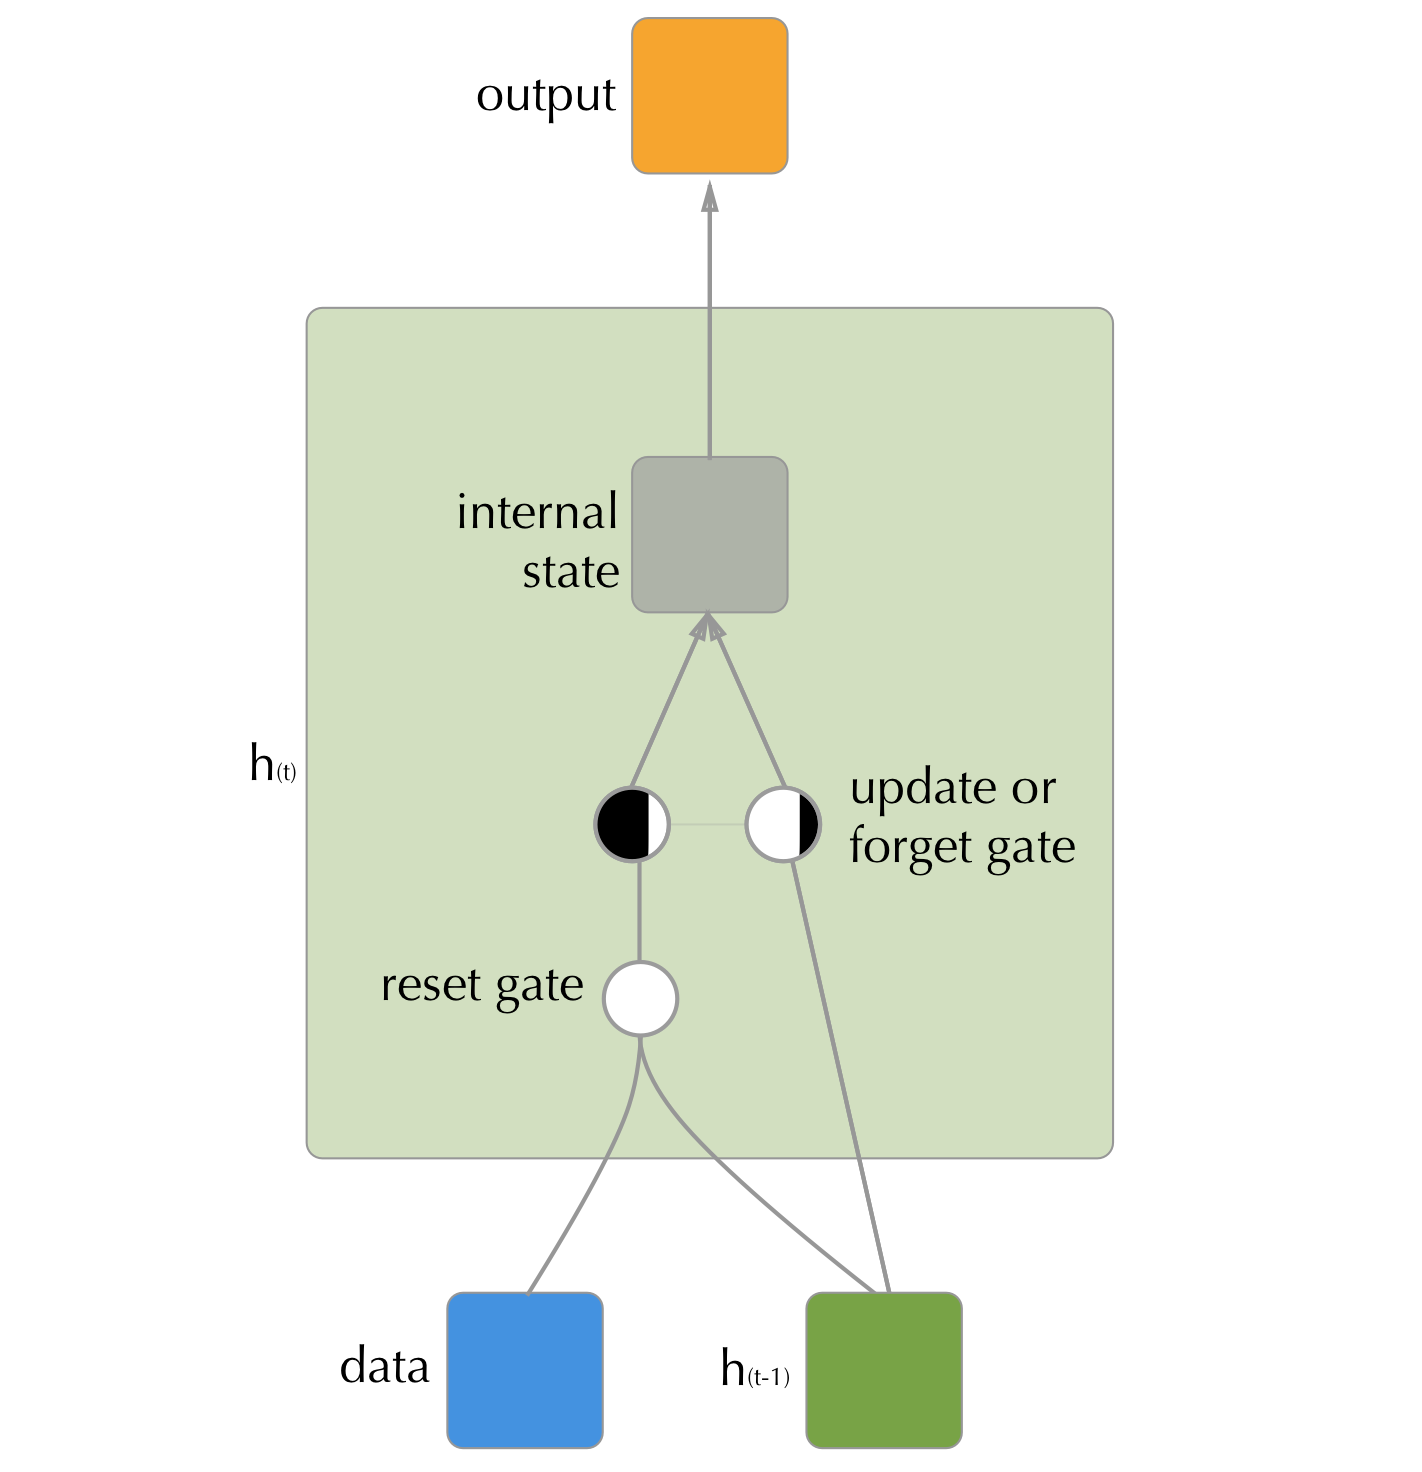 The internal structure of an GRU hidden unit. Unlike the LSTM there are only two gates, with the update and forget get tasks being taken care of by a single gate that controls what proportion to remember and what to forget. In addition, a reset gate controls how much of the hidden state from the previous step to bring into the current.